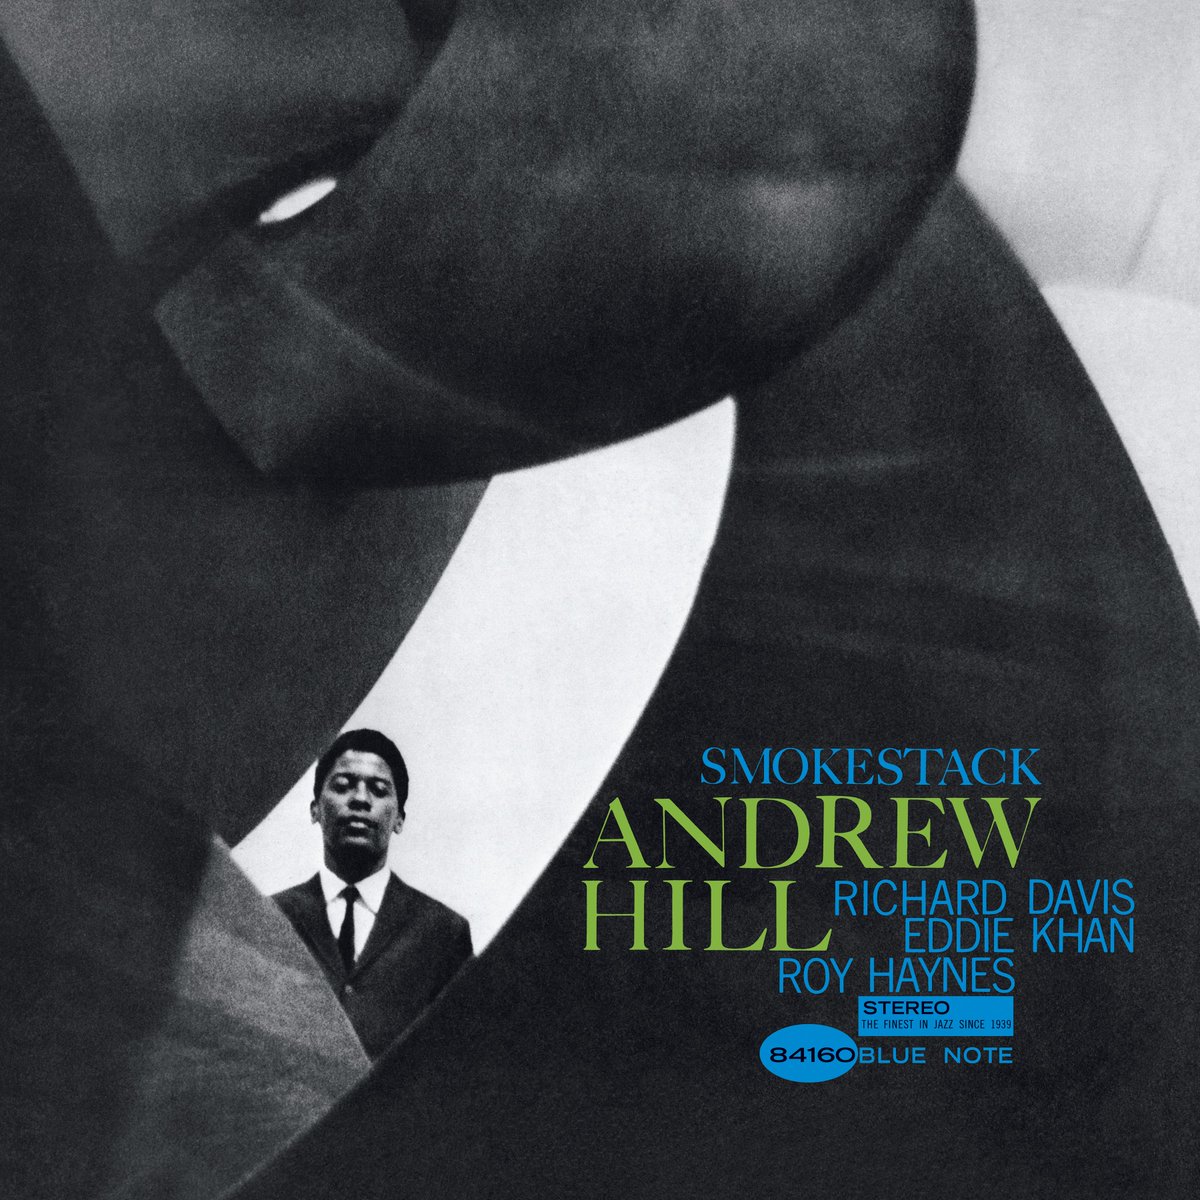 Pianist #AndrewHill recorded 'Smoke Stack' 60 years ago #OTD December 13, 1963 with bassists Richard Davis & Eddie Khan & drummer Roy Haynes. Get the Classic Vinyl Edition: store.bluenote.com/collections/vi… Hear the title track on our Spotlight playlist: bluenote.lnk.to/AndrewHillFine…